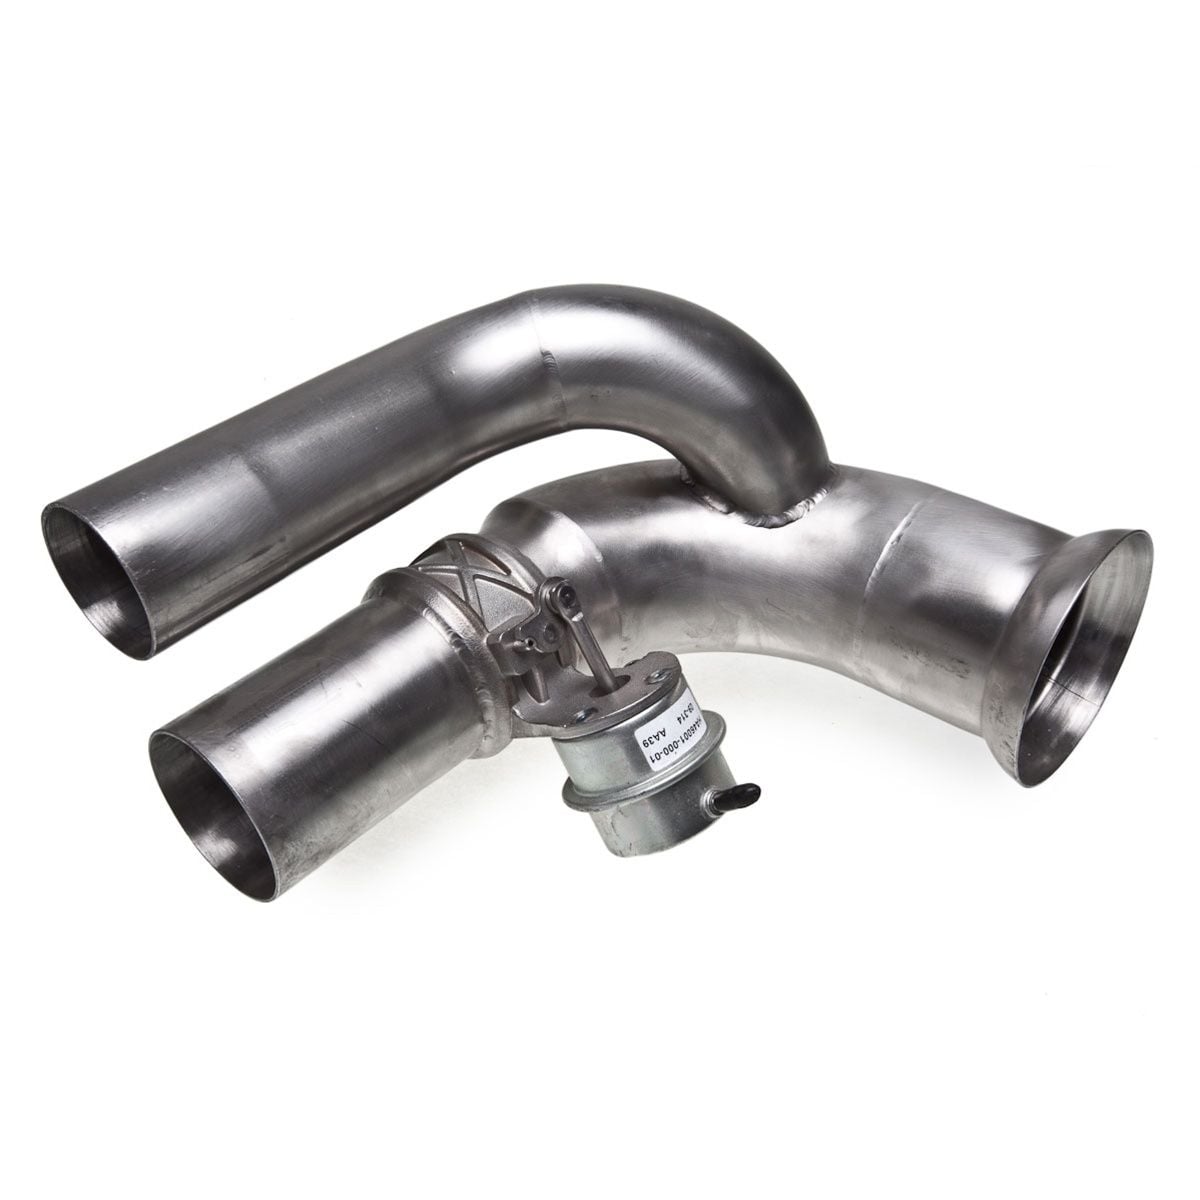 Engine - Exhaust - WTB - Valved side muffler bypass for 991.1 GT3-RS - Used - 2016 Porsche 911 - Thousand Oaks, CA 91360, United States